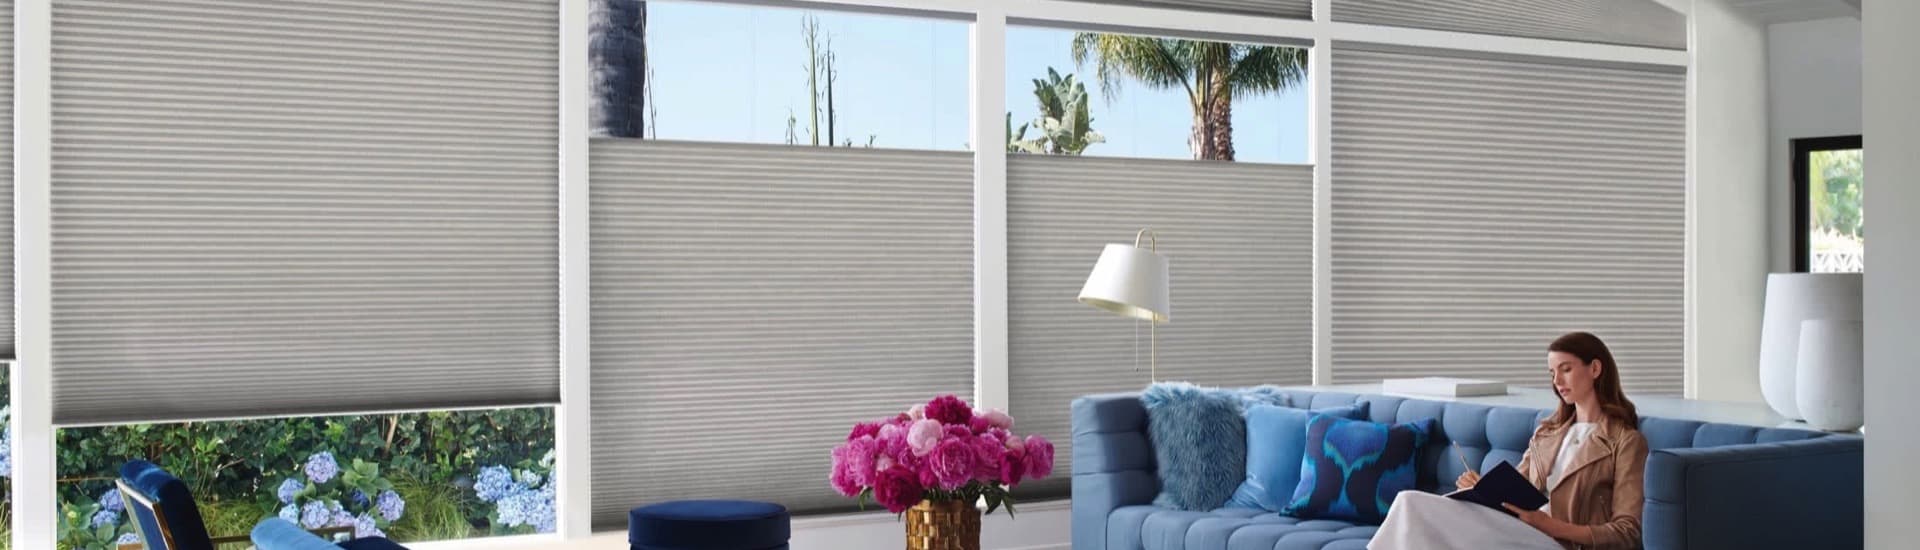 Duette Honeycomb Shades with Powerview